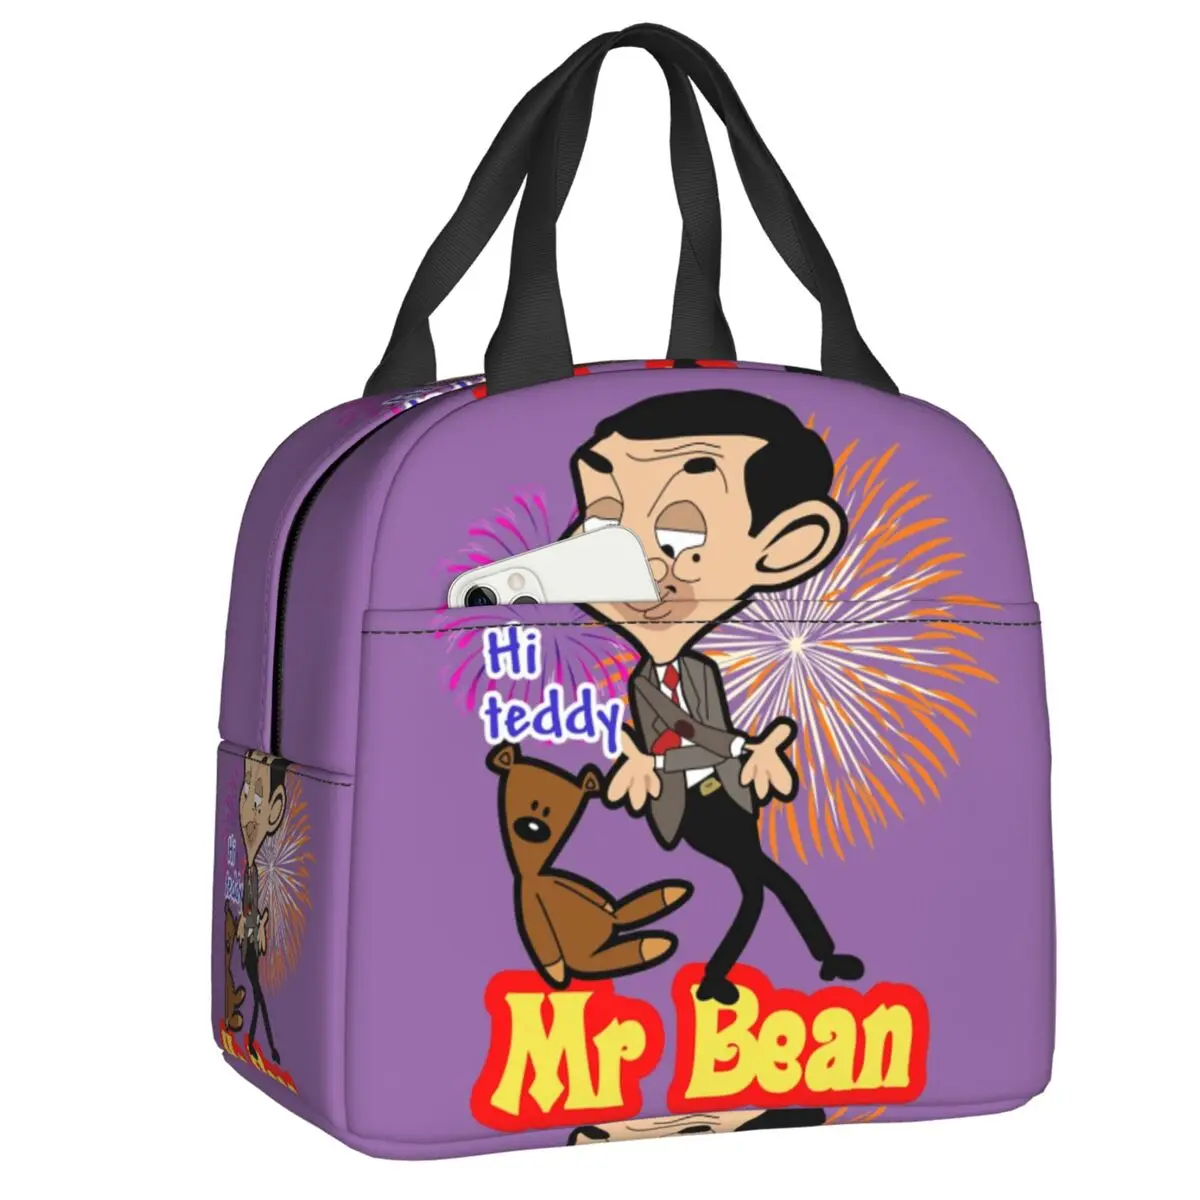 Cute Hand Drawn Cartoon Image Of Mr Bean And His Bear Insulated Lunch Bags for Women Portable Cooler Thermal Bento Box